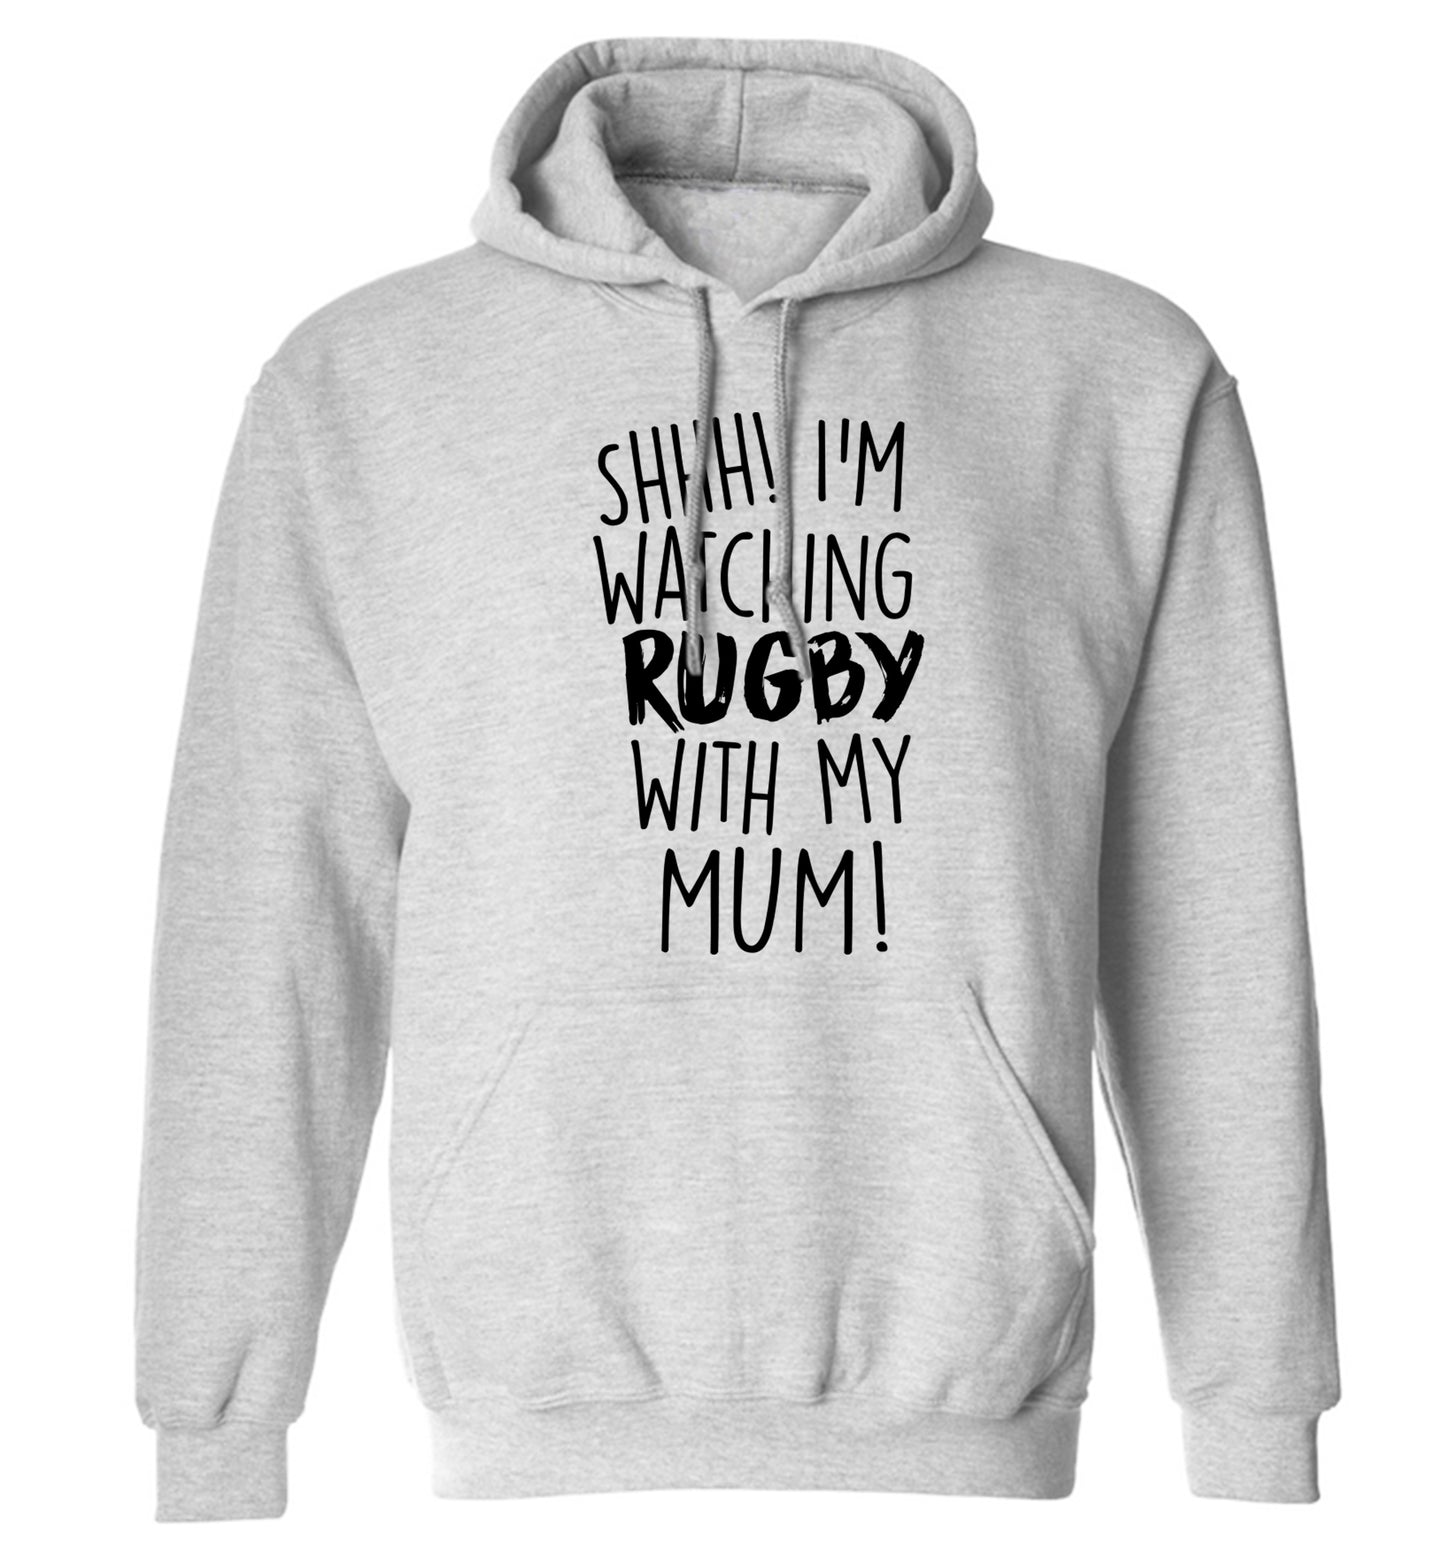 Shh... I'm watching rugby with my mum adults unisex grey hoodie 2XL